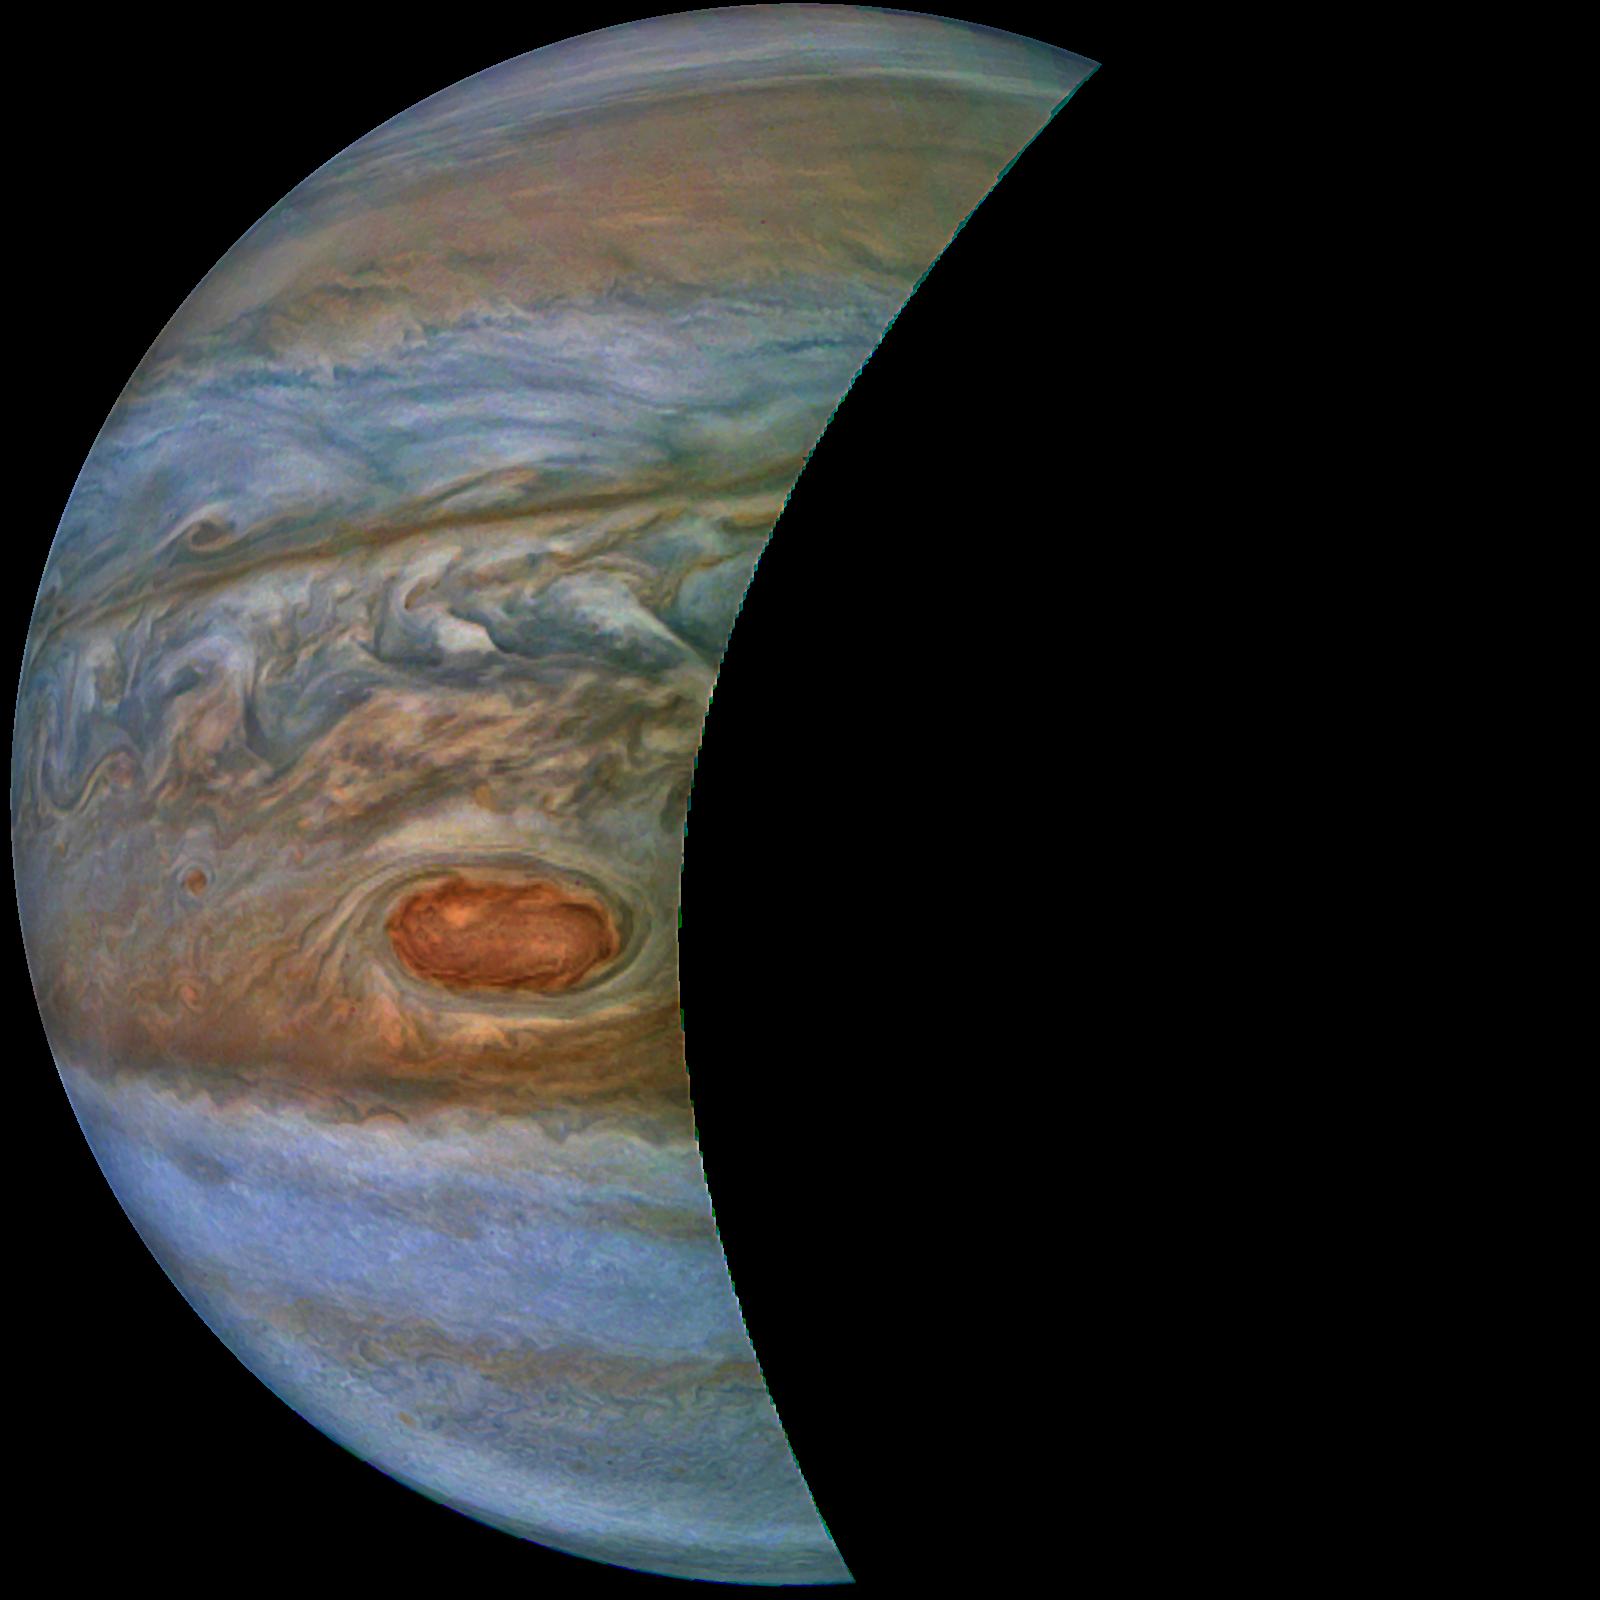 PIA22940: Juno Sees South Equatorial Belt 'Brown Barge'